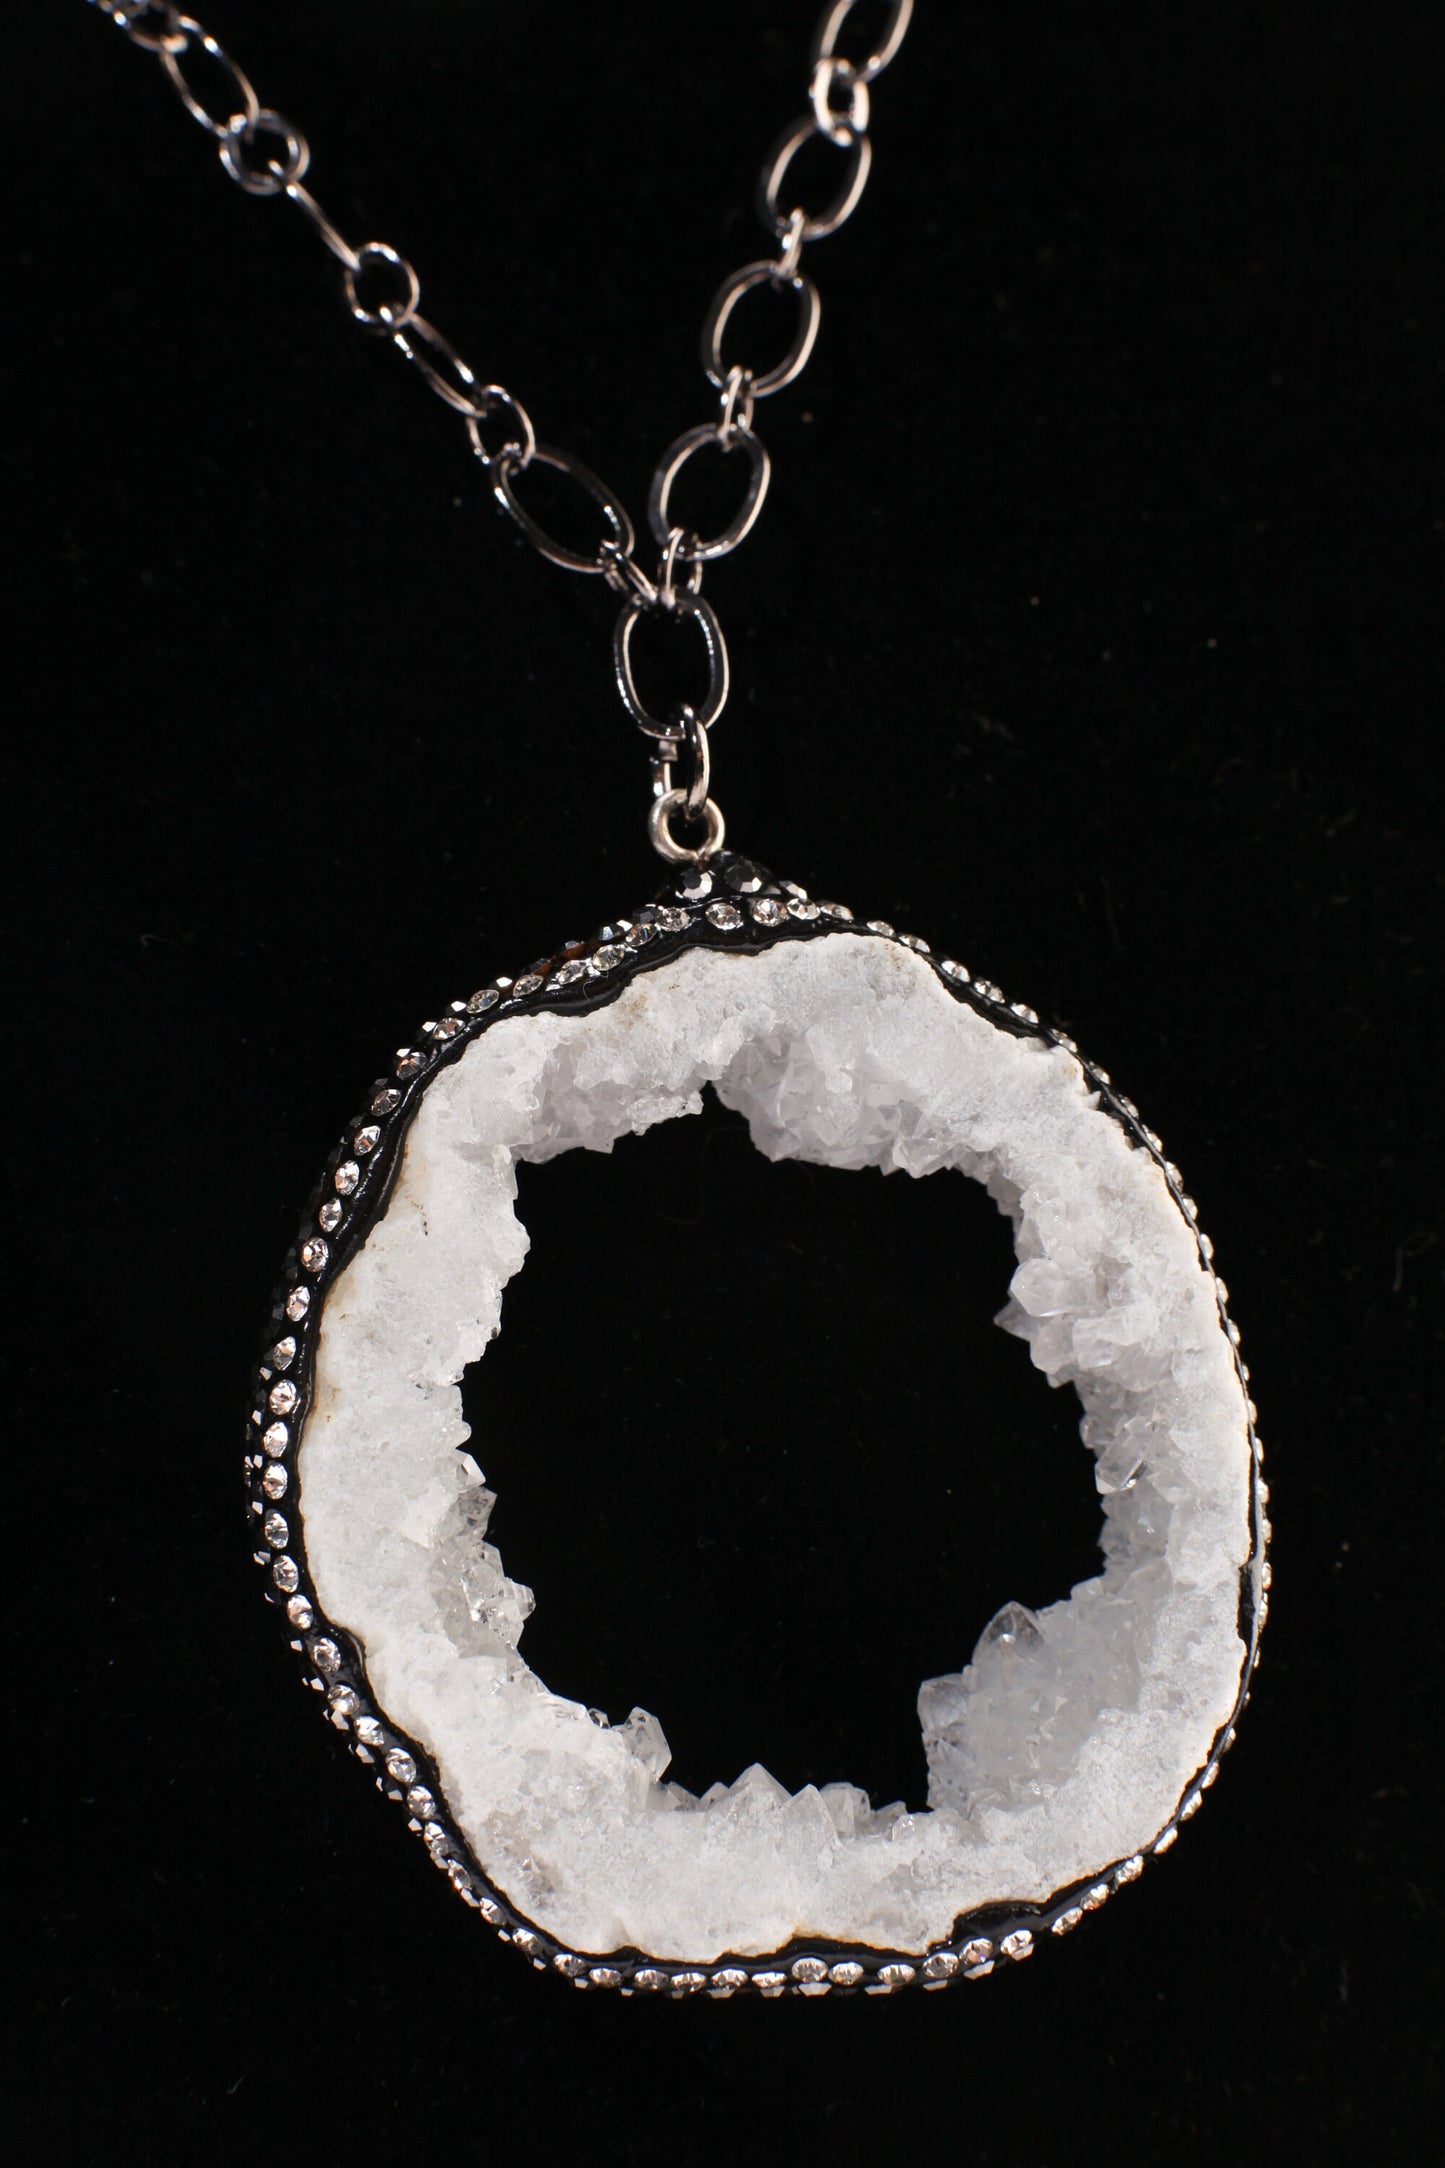 White Druzy Agate, Geod Pendant 53x47mm, CZ Rhinestone Pave, Accent with 10mm South Seashell Pearl 20.5" gunmetal oxidized Necklace